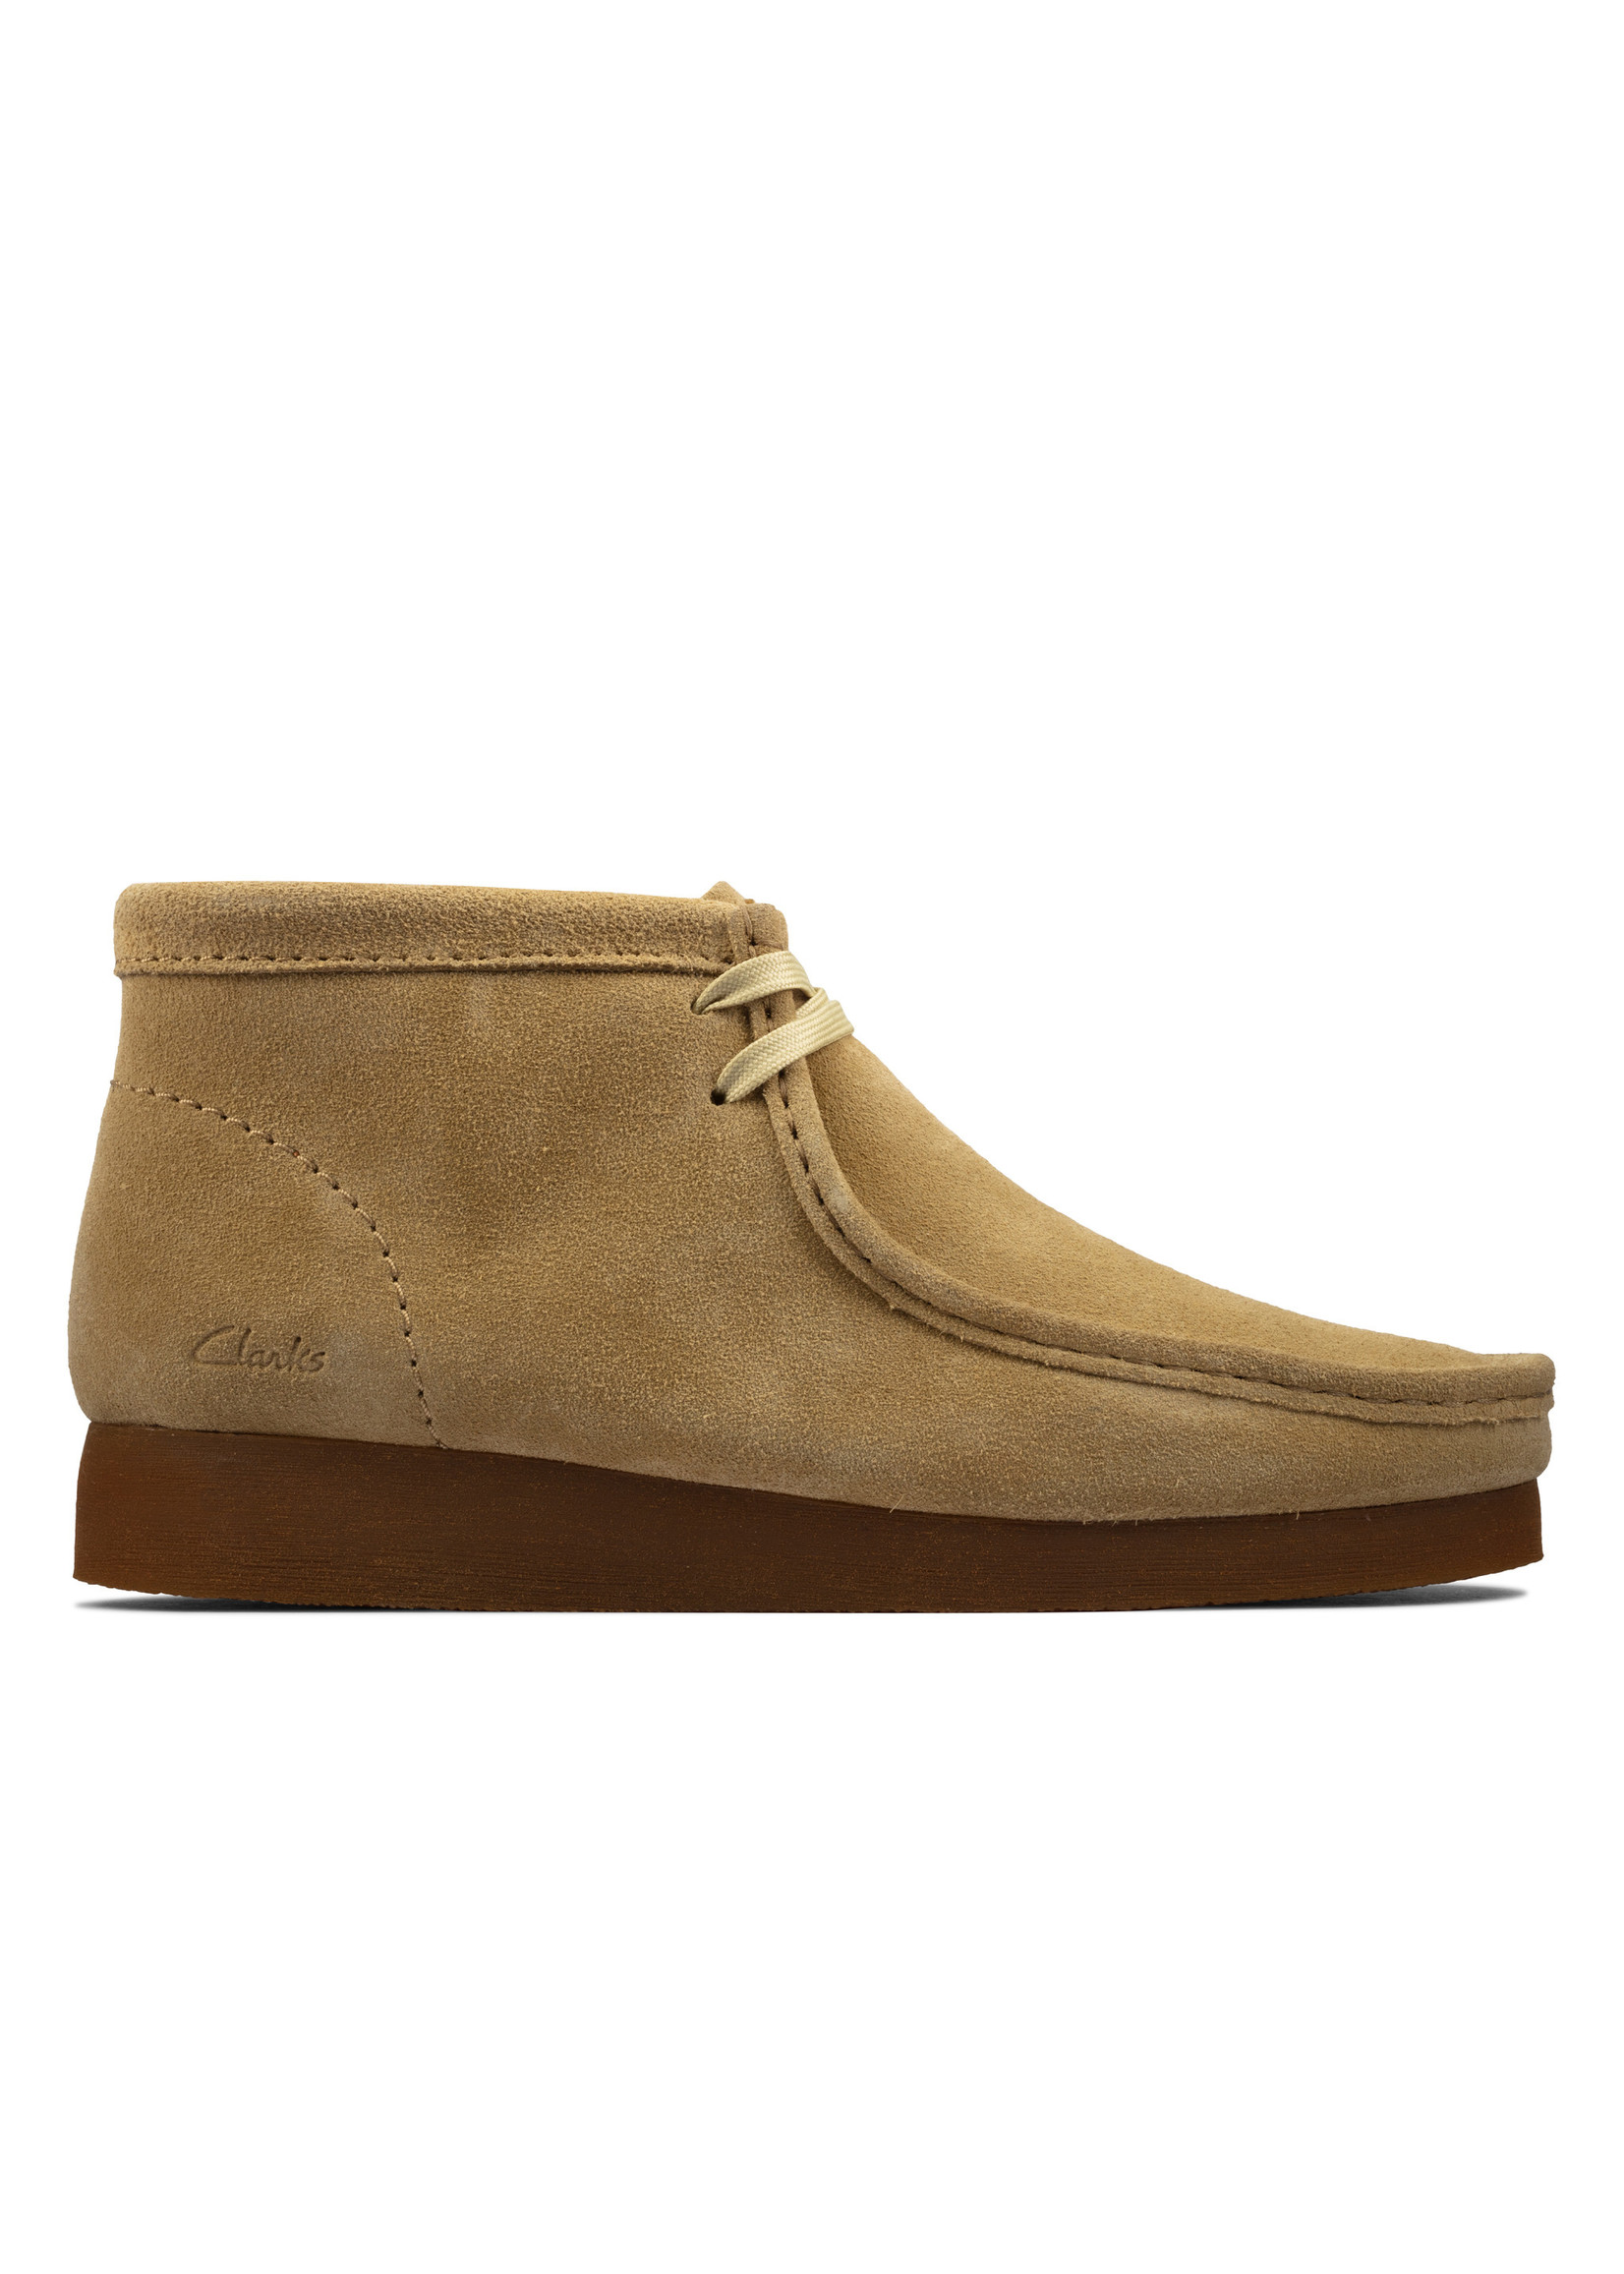 Clarks Wallabee Boot2 Maple Suede - SHOE PLUS - Low Prices ...